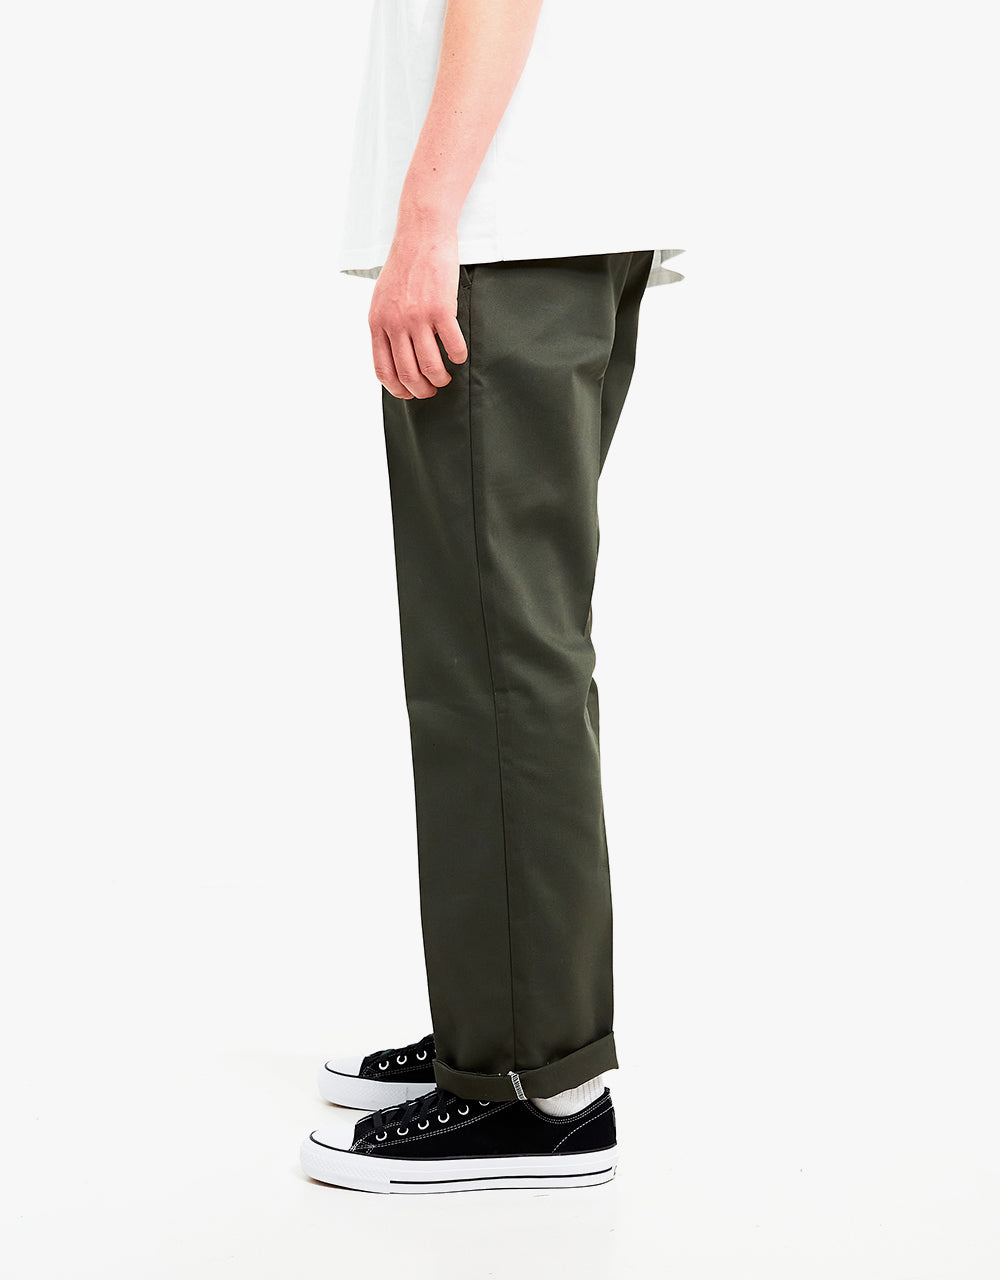 Dickies 873 Recycled Work Pant - Olive Green